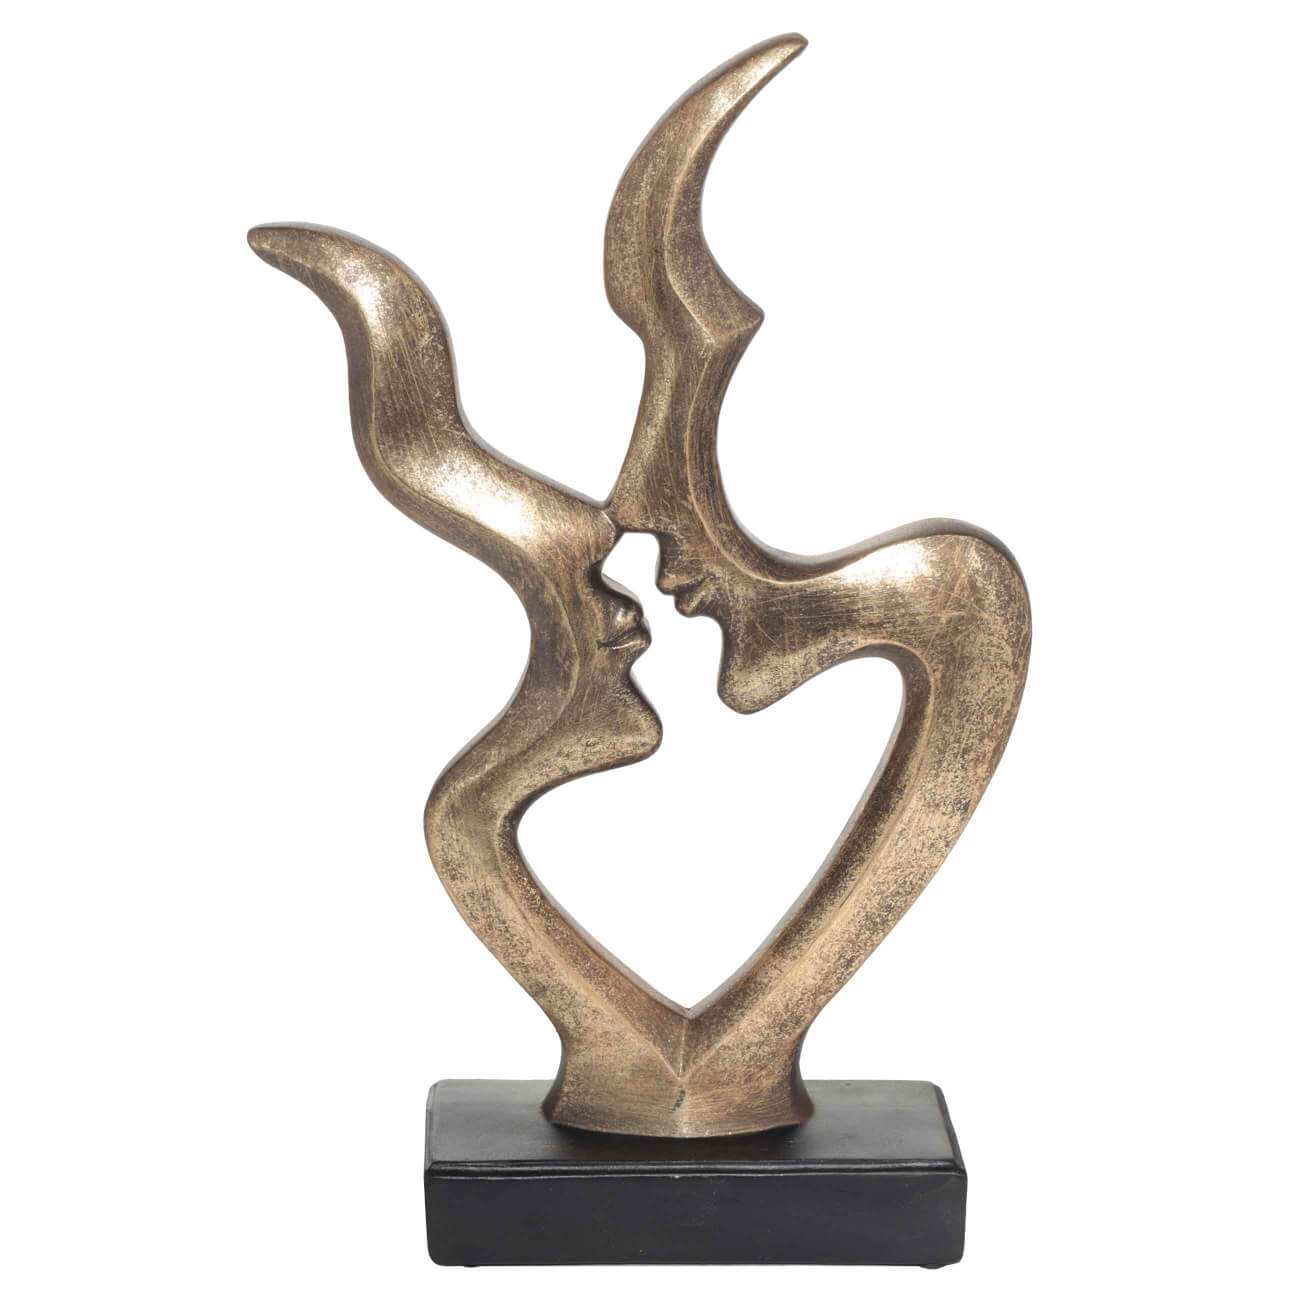 Statuette, 35 cm, polyresin, black and gold, Silhouette of a kiss, Baise изображение № 1